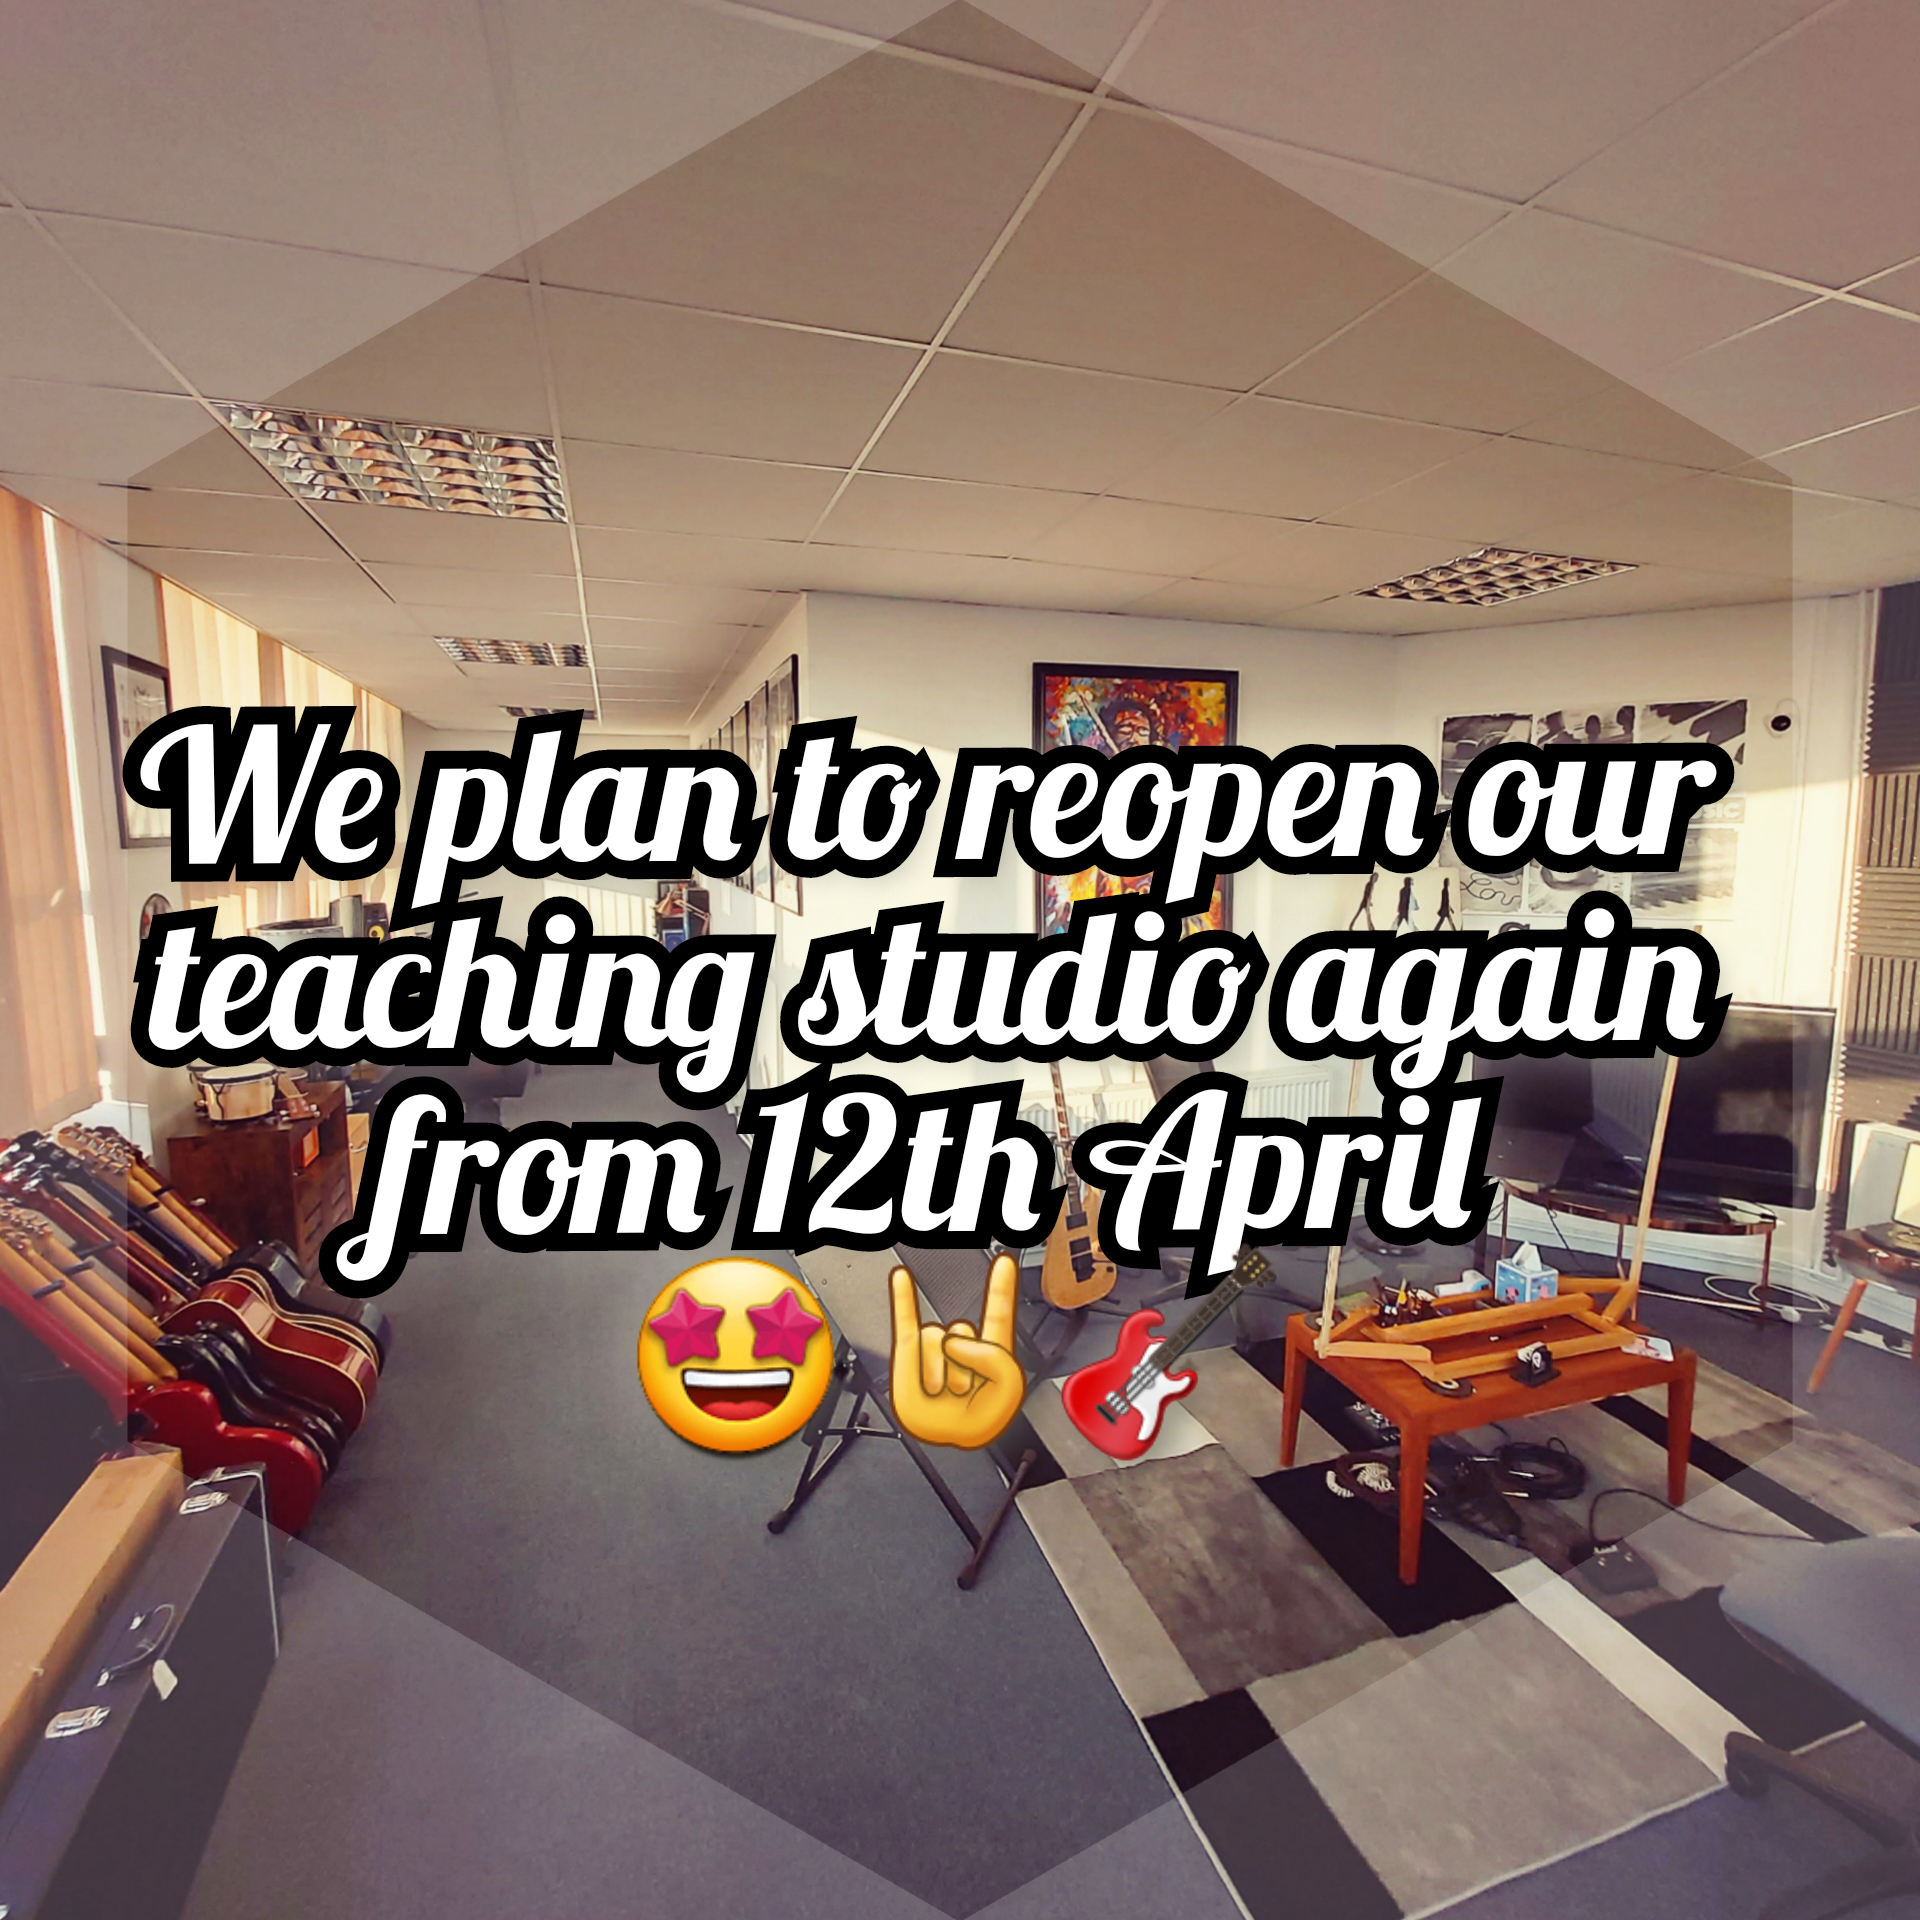 🎸We plan to reopen again from 12th April!